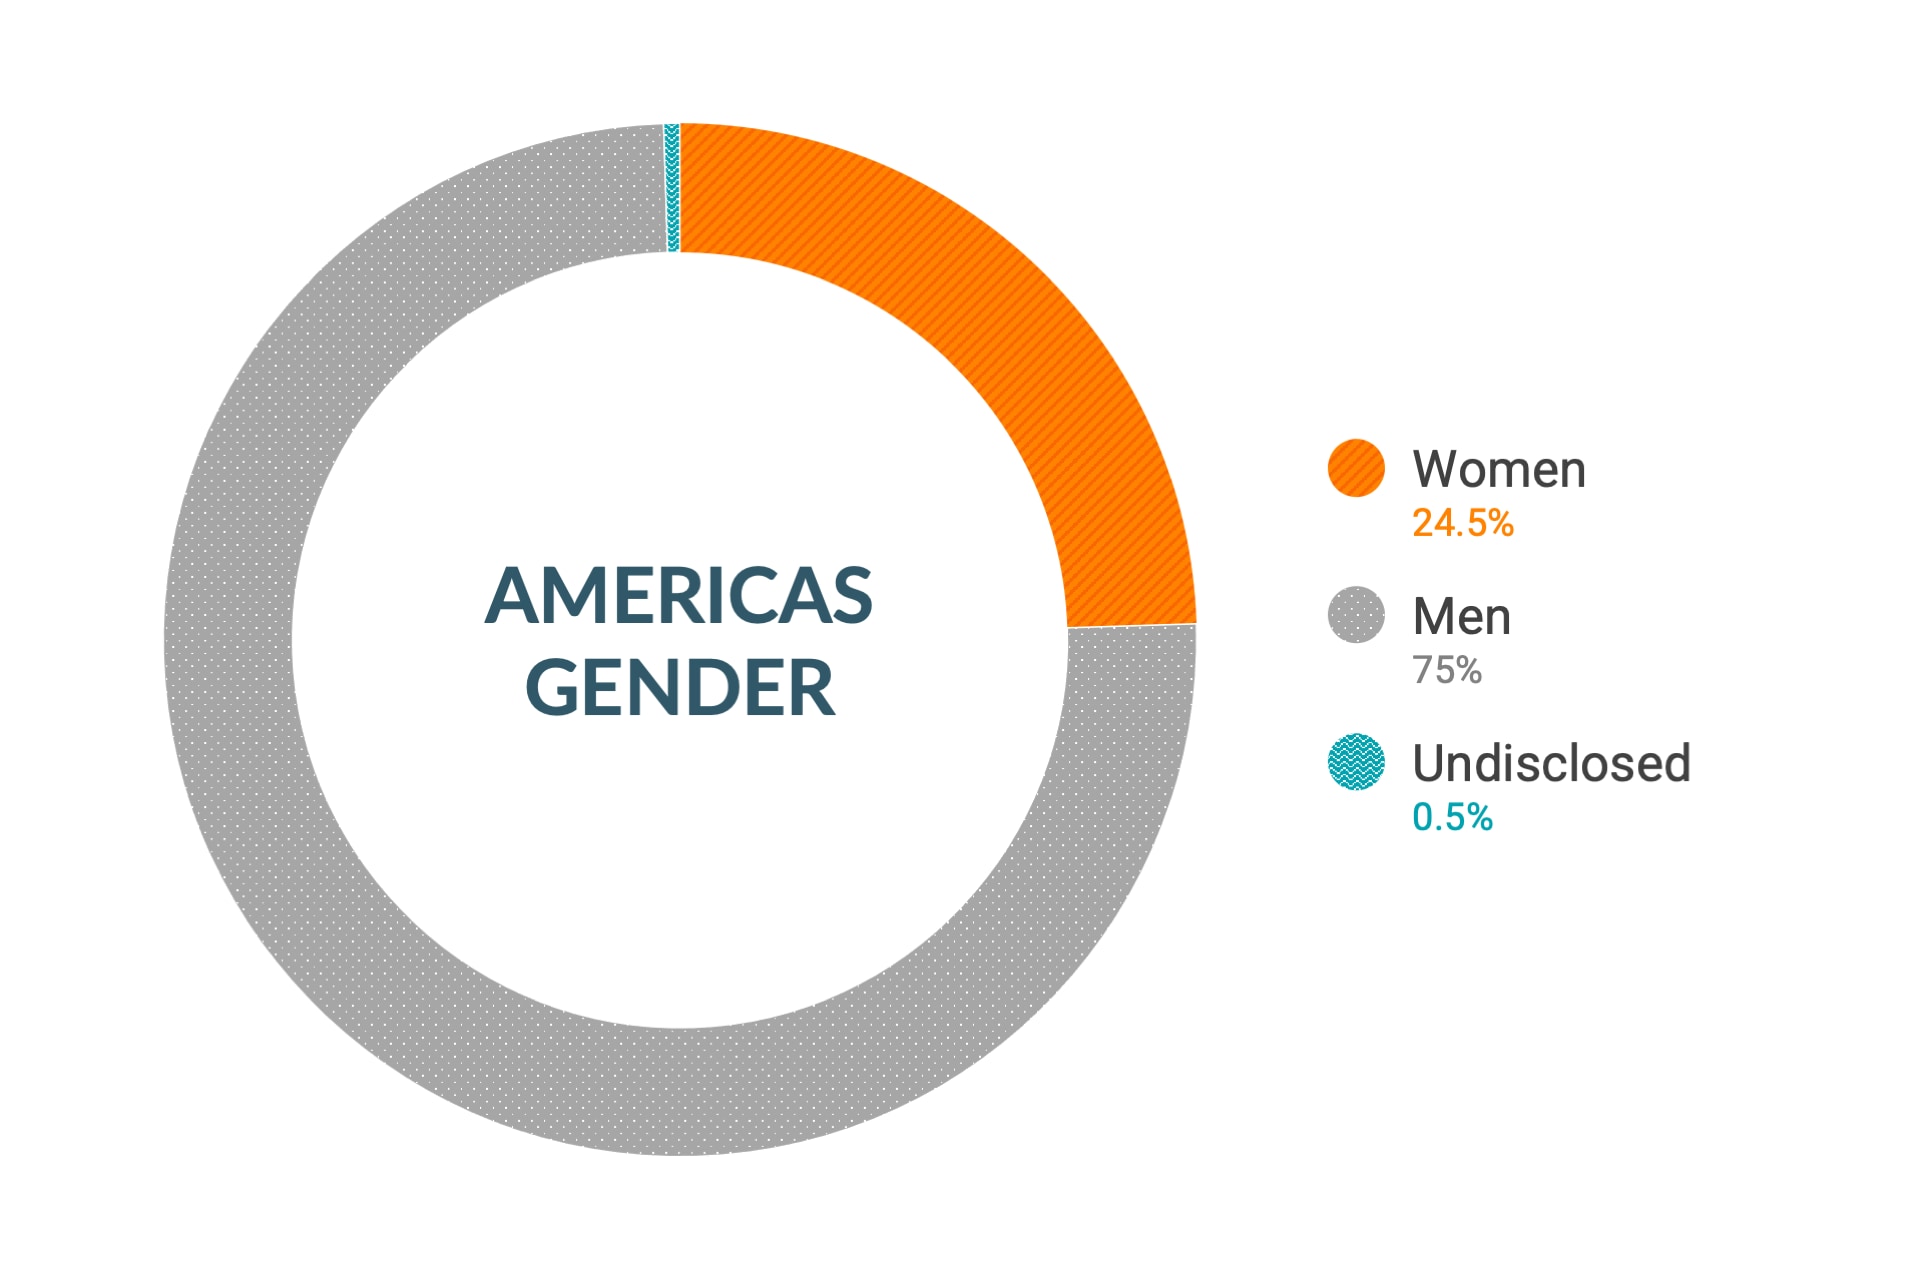 Cloudera Diversity and Inclusion data for Americas Gender: Women 24.6%, Men 74.9%, Undisclosed 0.5%